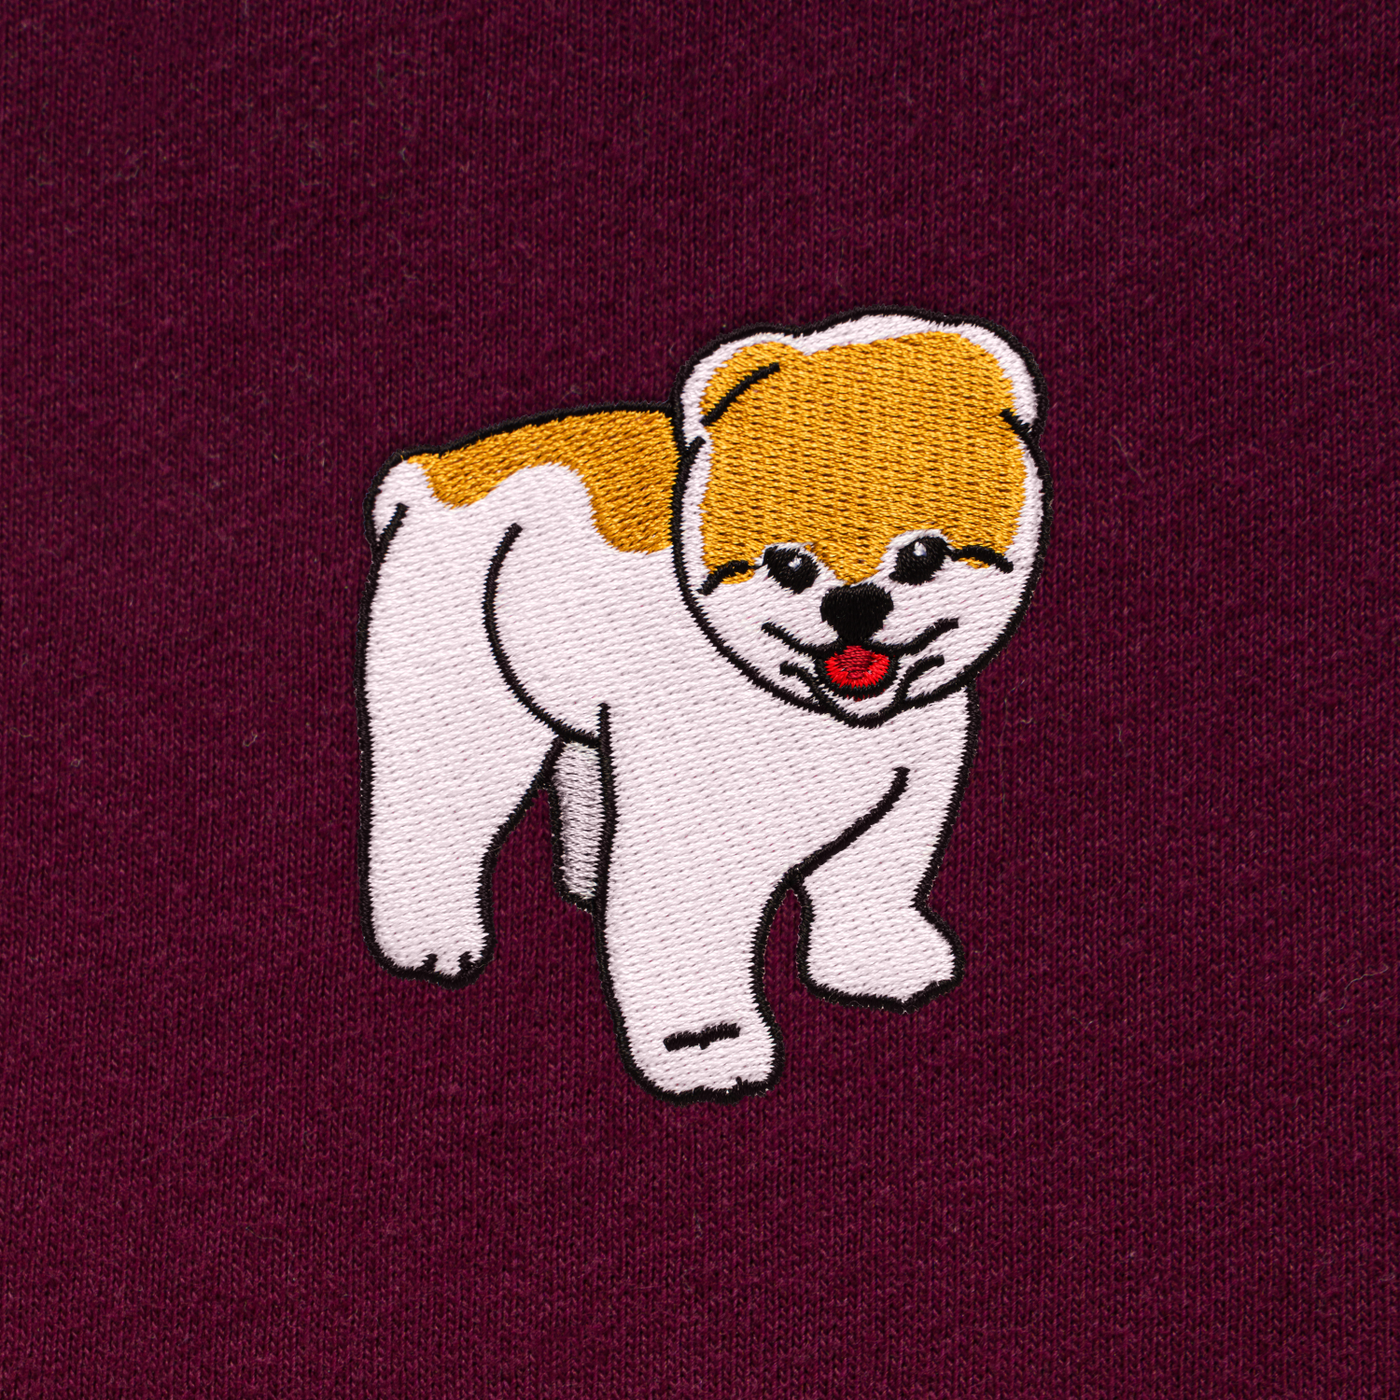 Bobby's Planet Men's Embroidered Pomeranian Long Sleeve Shirt from Paws Dog Cat Animals Collection in Maroon Color#color_maroon